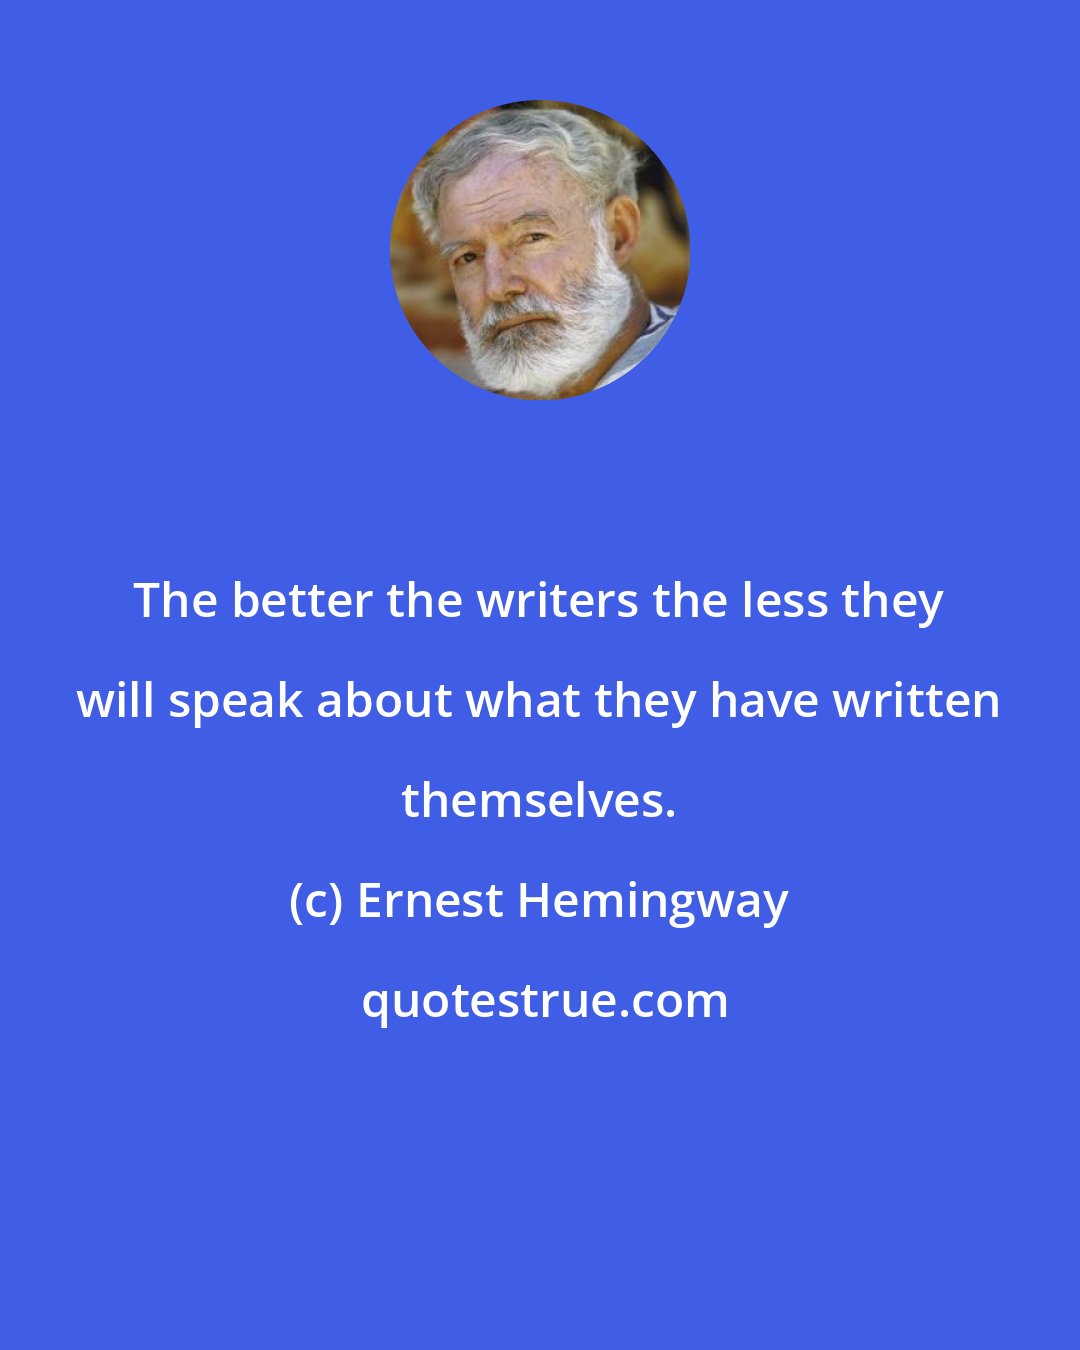 Ernest Hemingway: The better the writers the less they will speak about what they have written themselves.